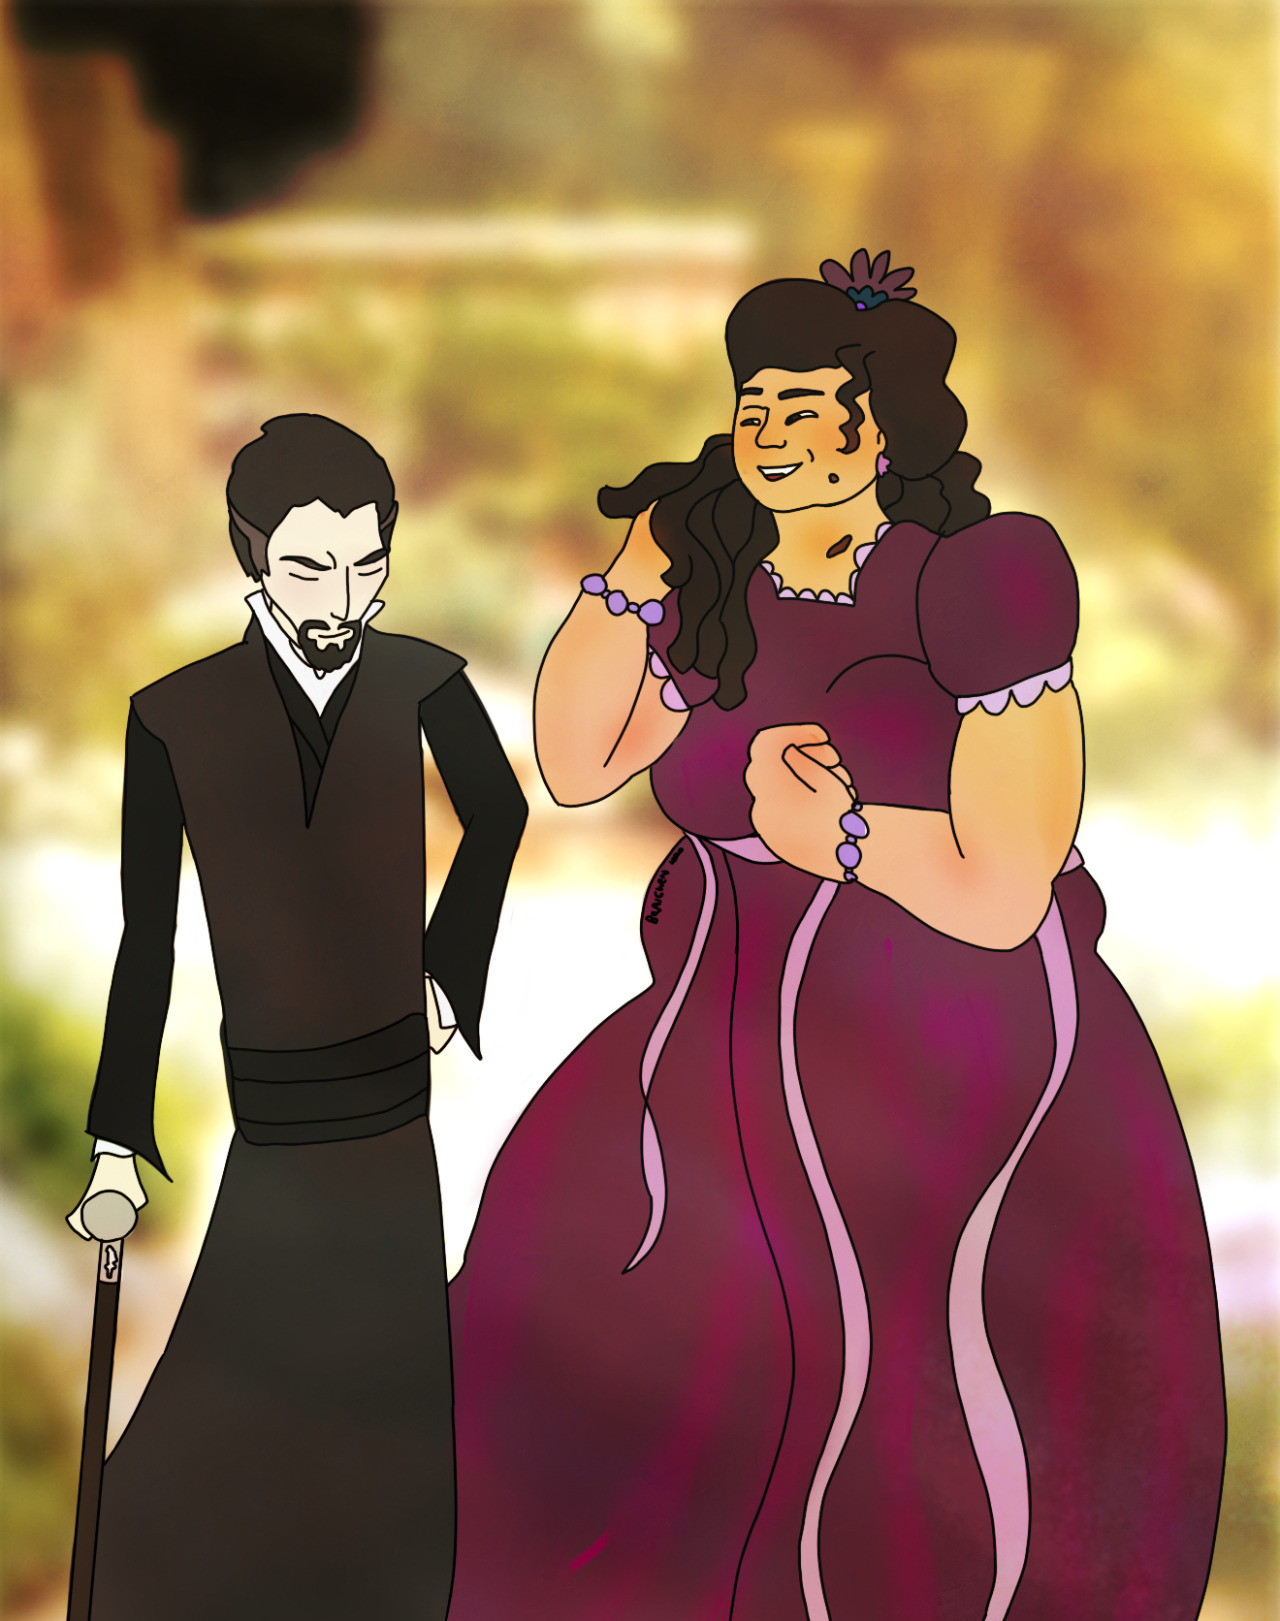 vetinari and lady sybil walking in a garden